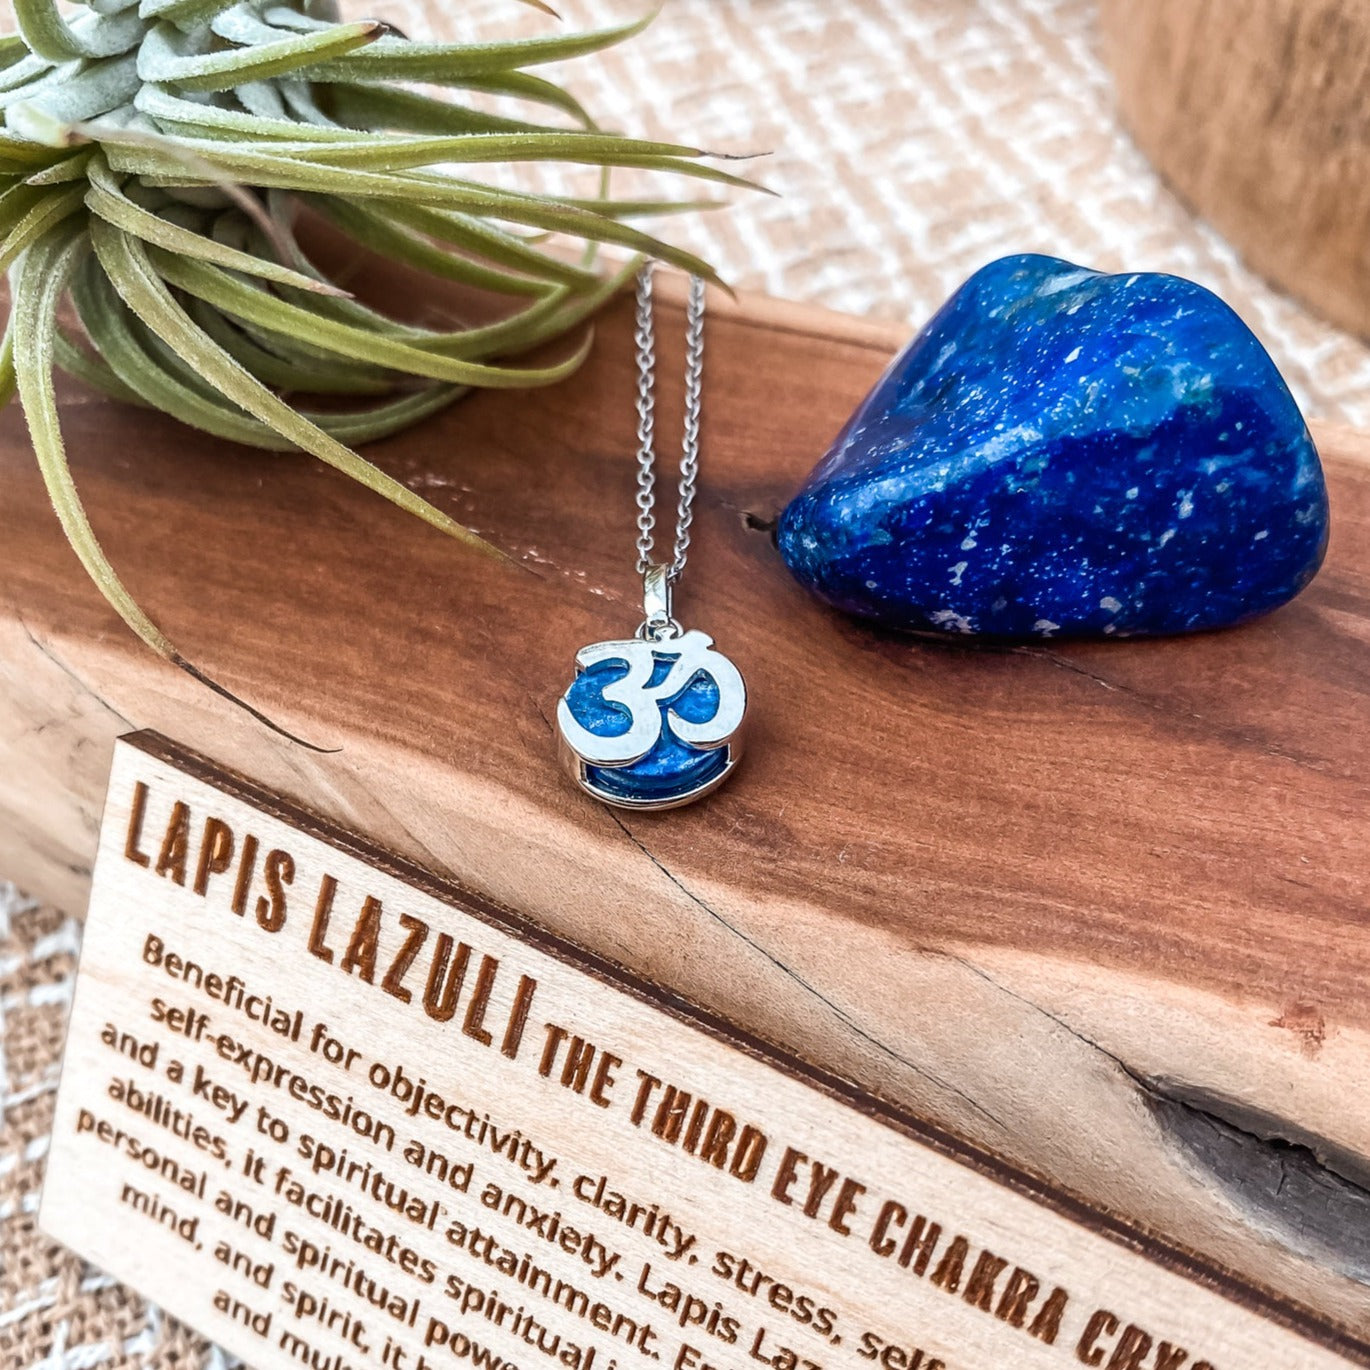 Silver Om Yoga charm necklace in Lapis lazuli